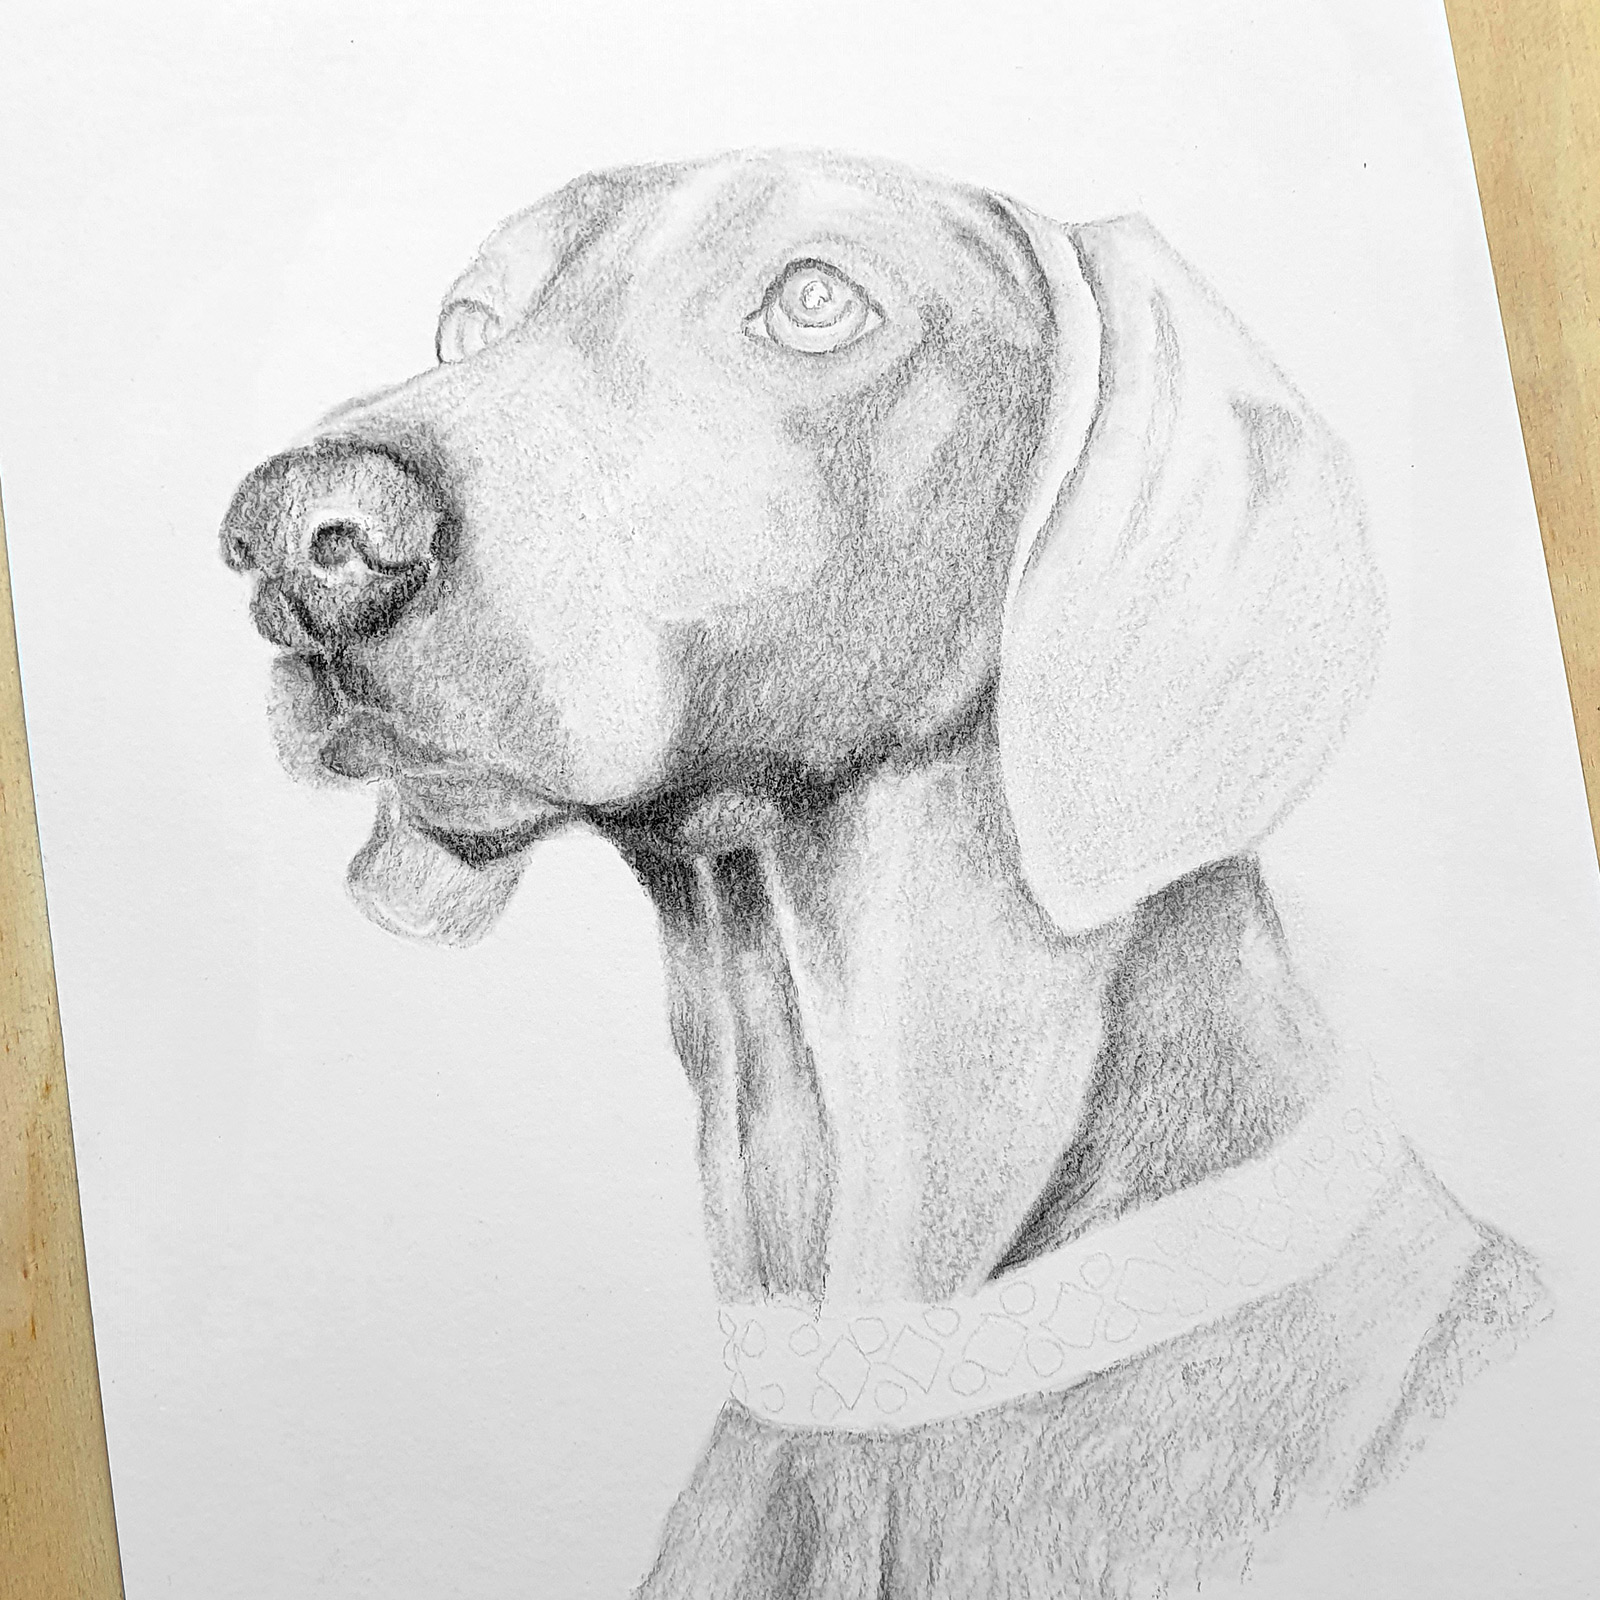 Preliminary drawing of a dog portrait